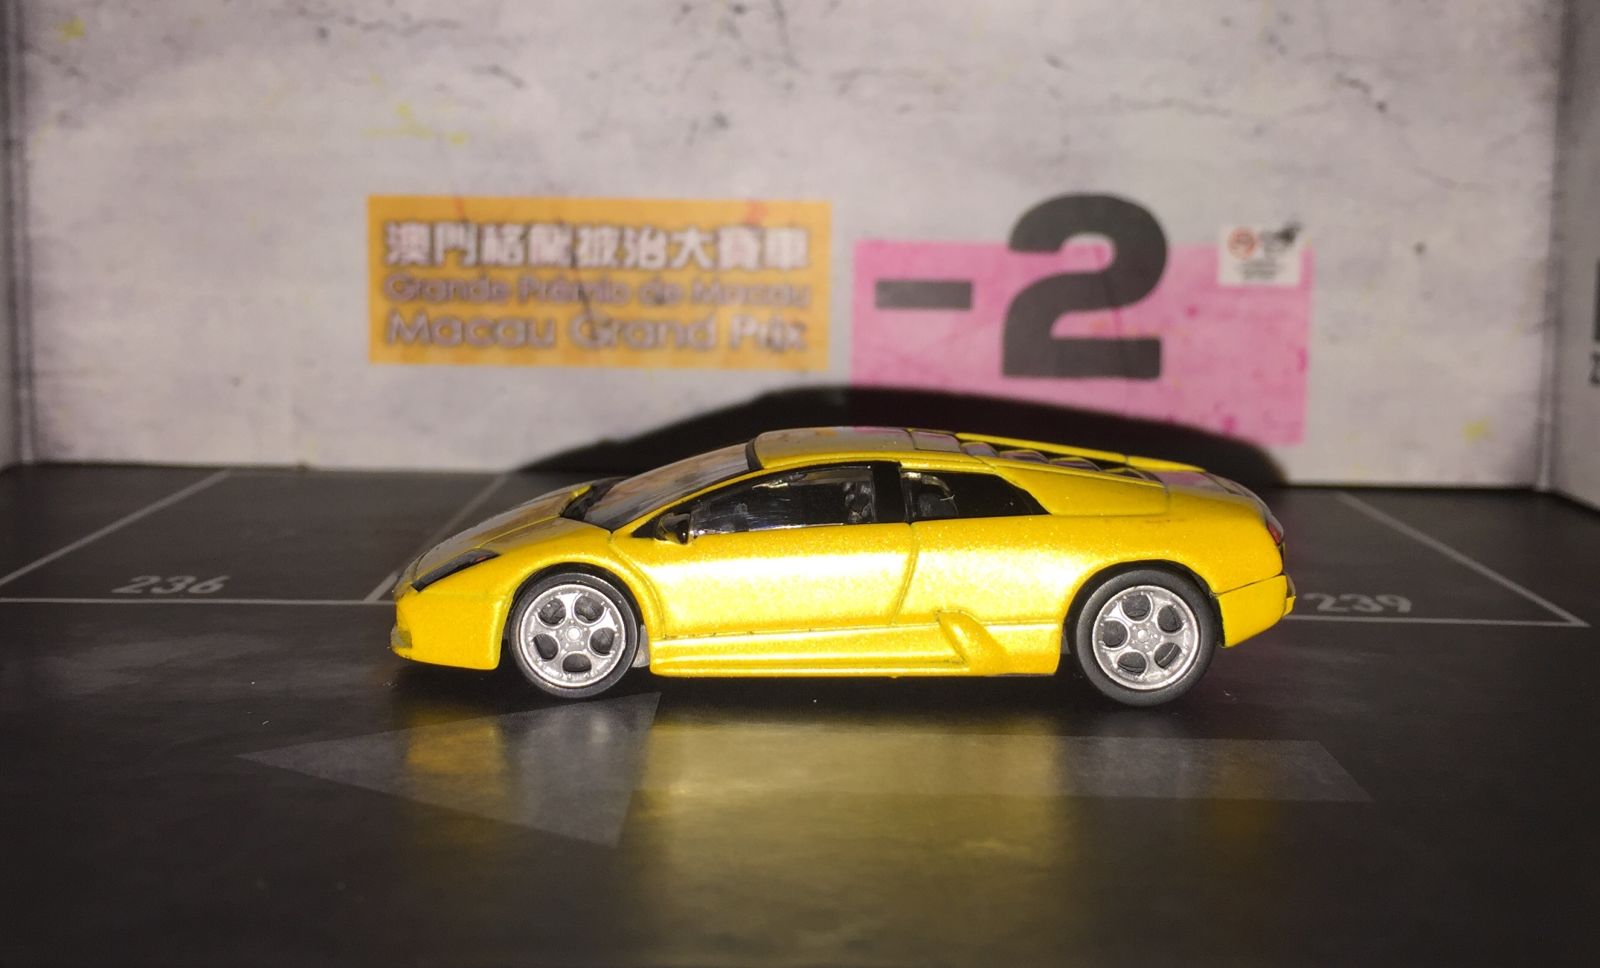 Illustration for article titled Yellow yellow Lambo